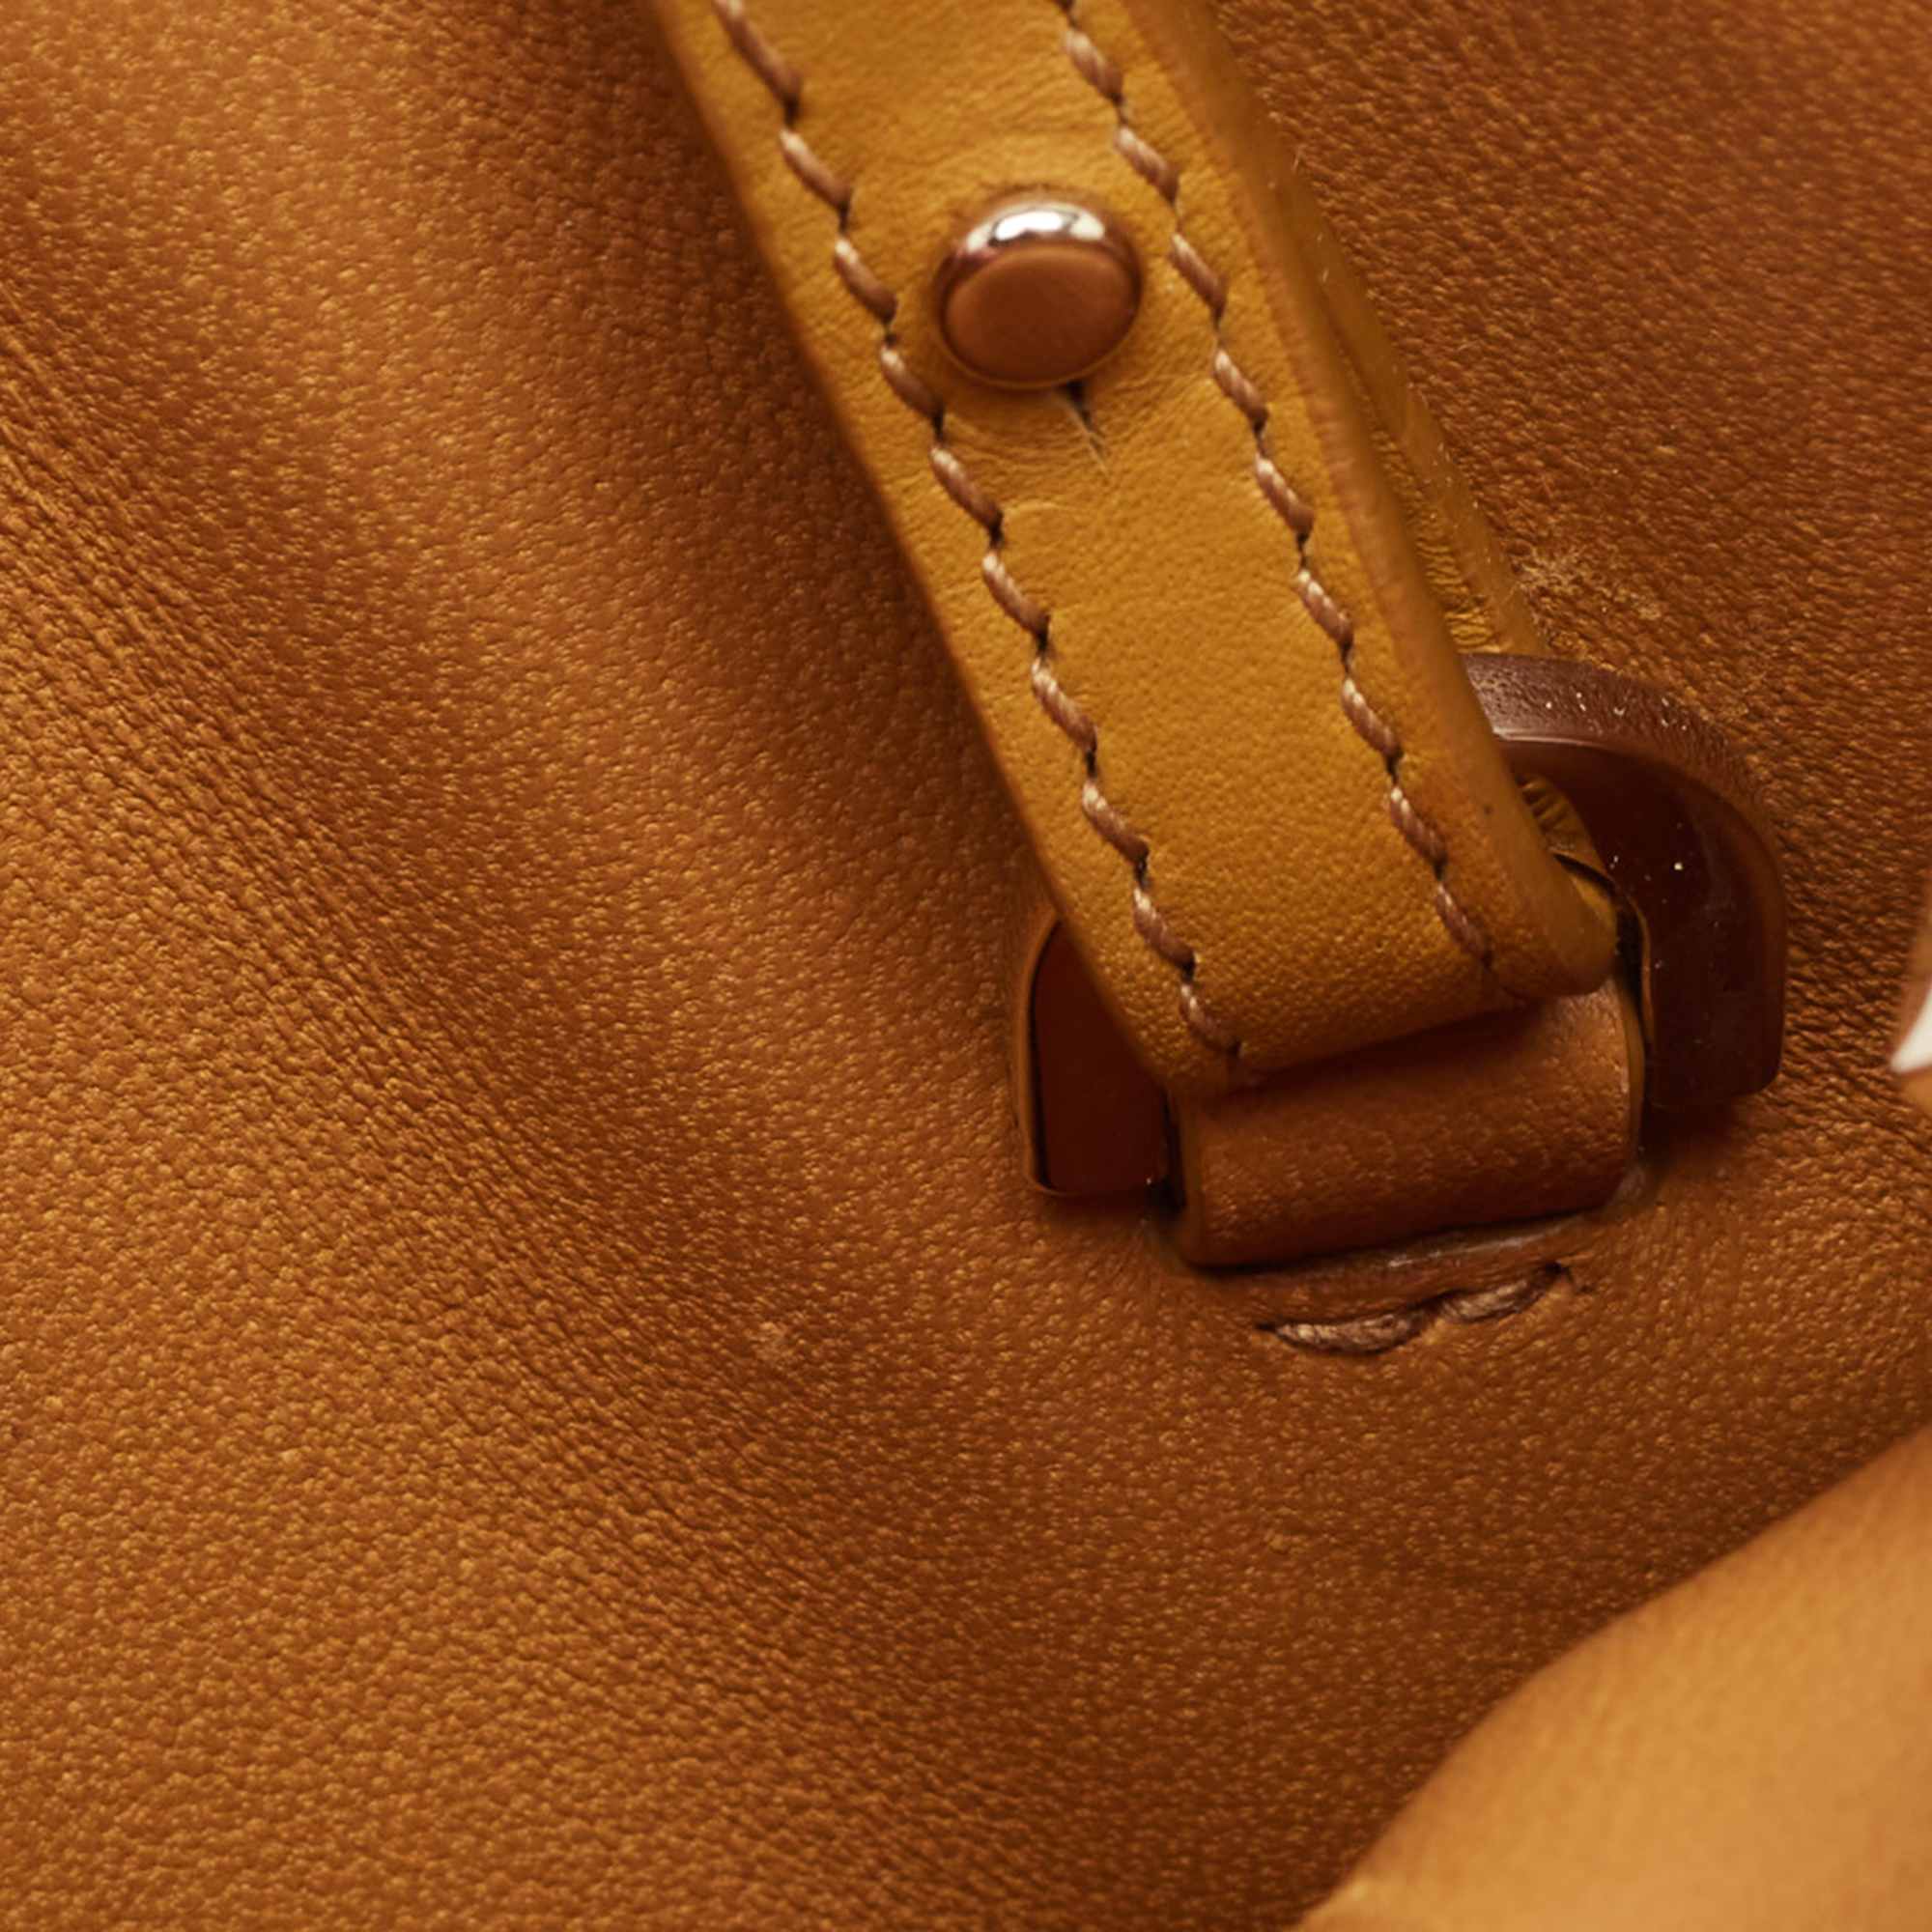 Loro Piana Yellow Leather And Suede My Way Crossbody Bag